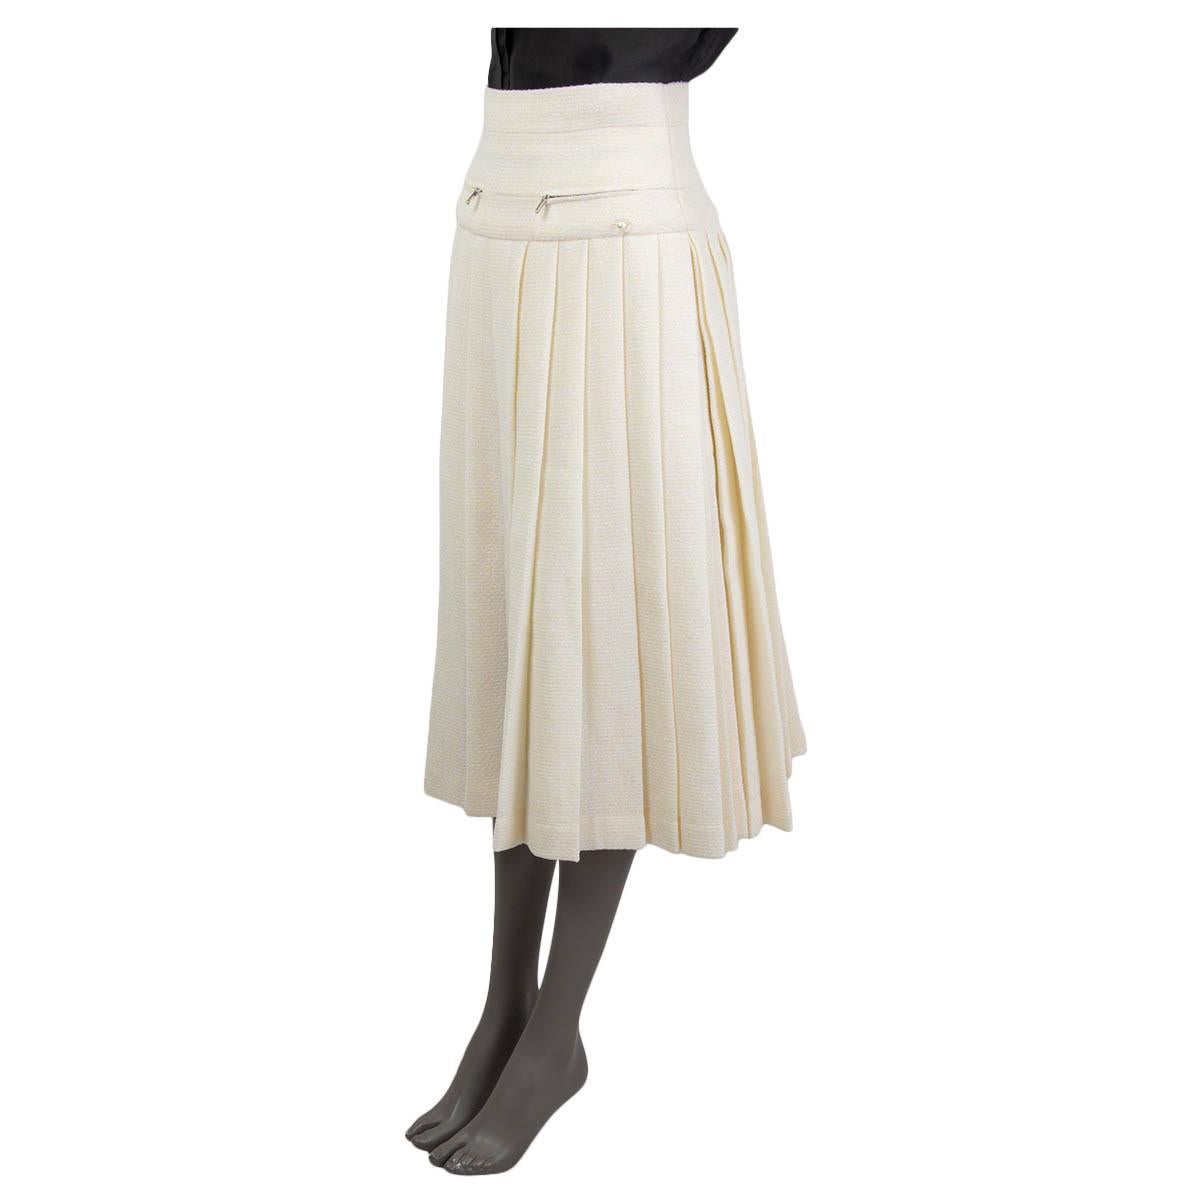 100% authentic Chanel pleated lurex high-waist midi skirt in ivory polyester (49%), wool (43%) and polyamide (8%) mixed with lilac metallic lurex threads. Fall/winter 2017 collection. Skirt has two faux zipper pockets at front and two slits on the